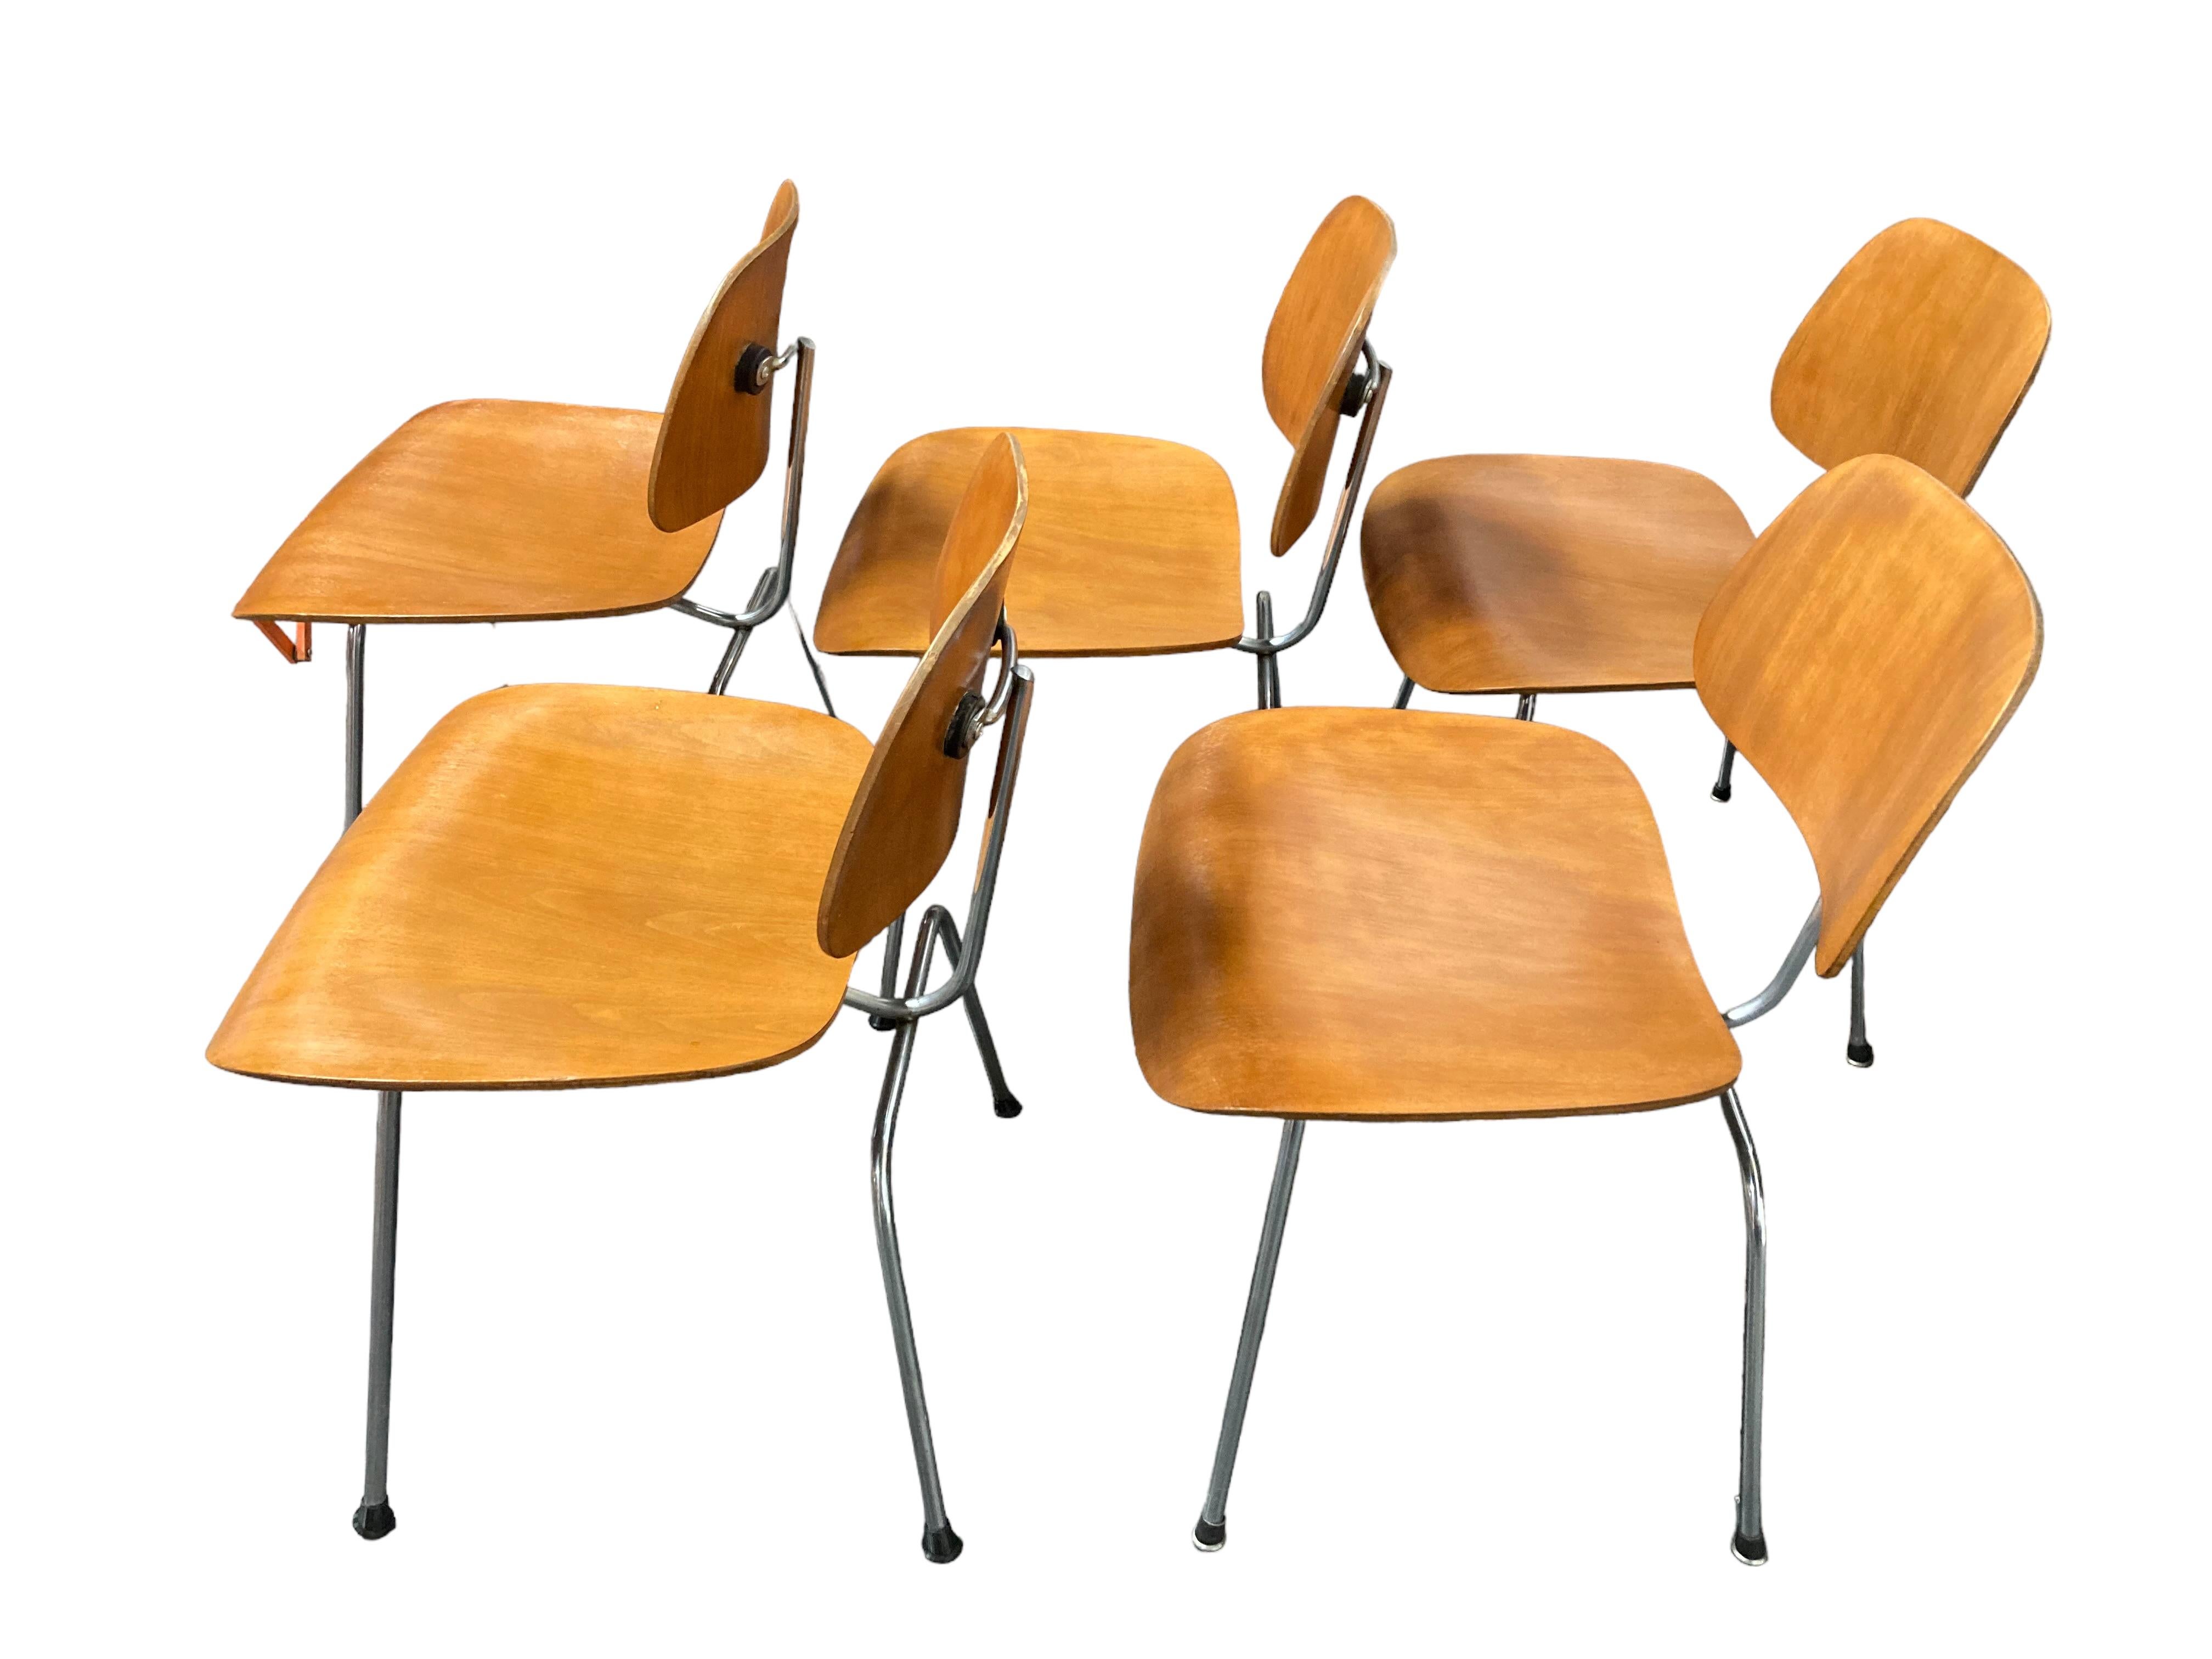 This set of five 1950s Mid-Century Modern Eames LCM lounge chairs by Herman Miller are in very in good condition and have been recently restored by a professional furniture repairman. This set of LCM chairs are armless and feature a sleek, modern